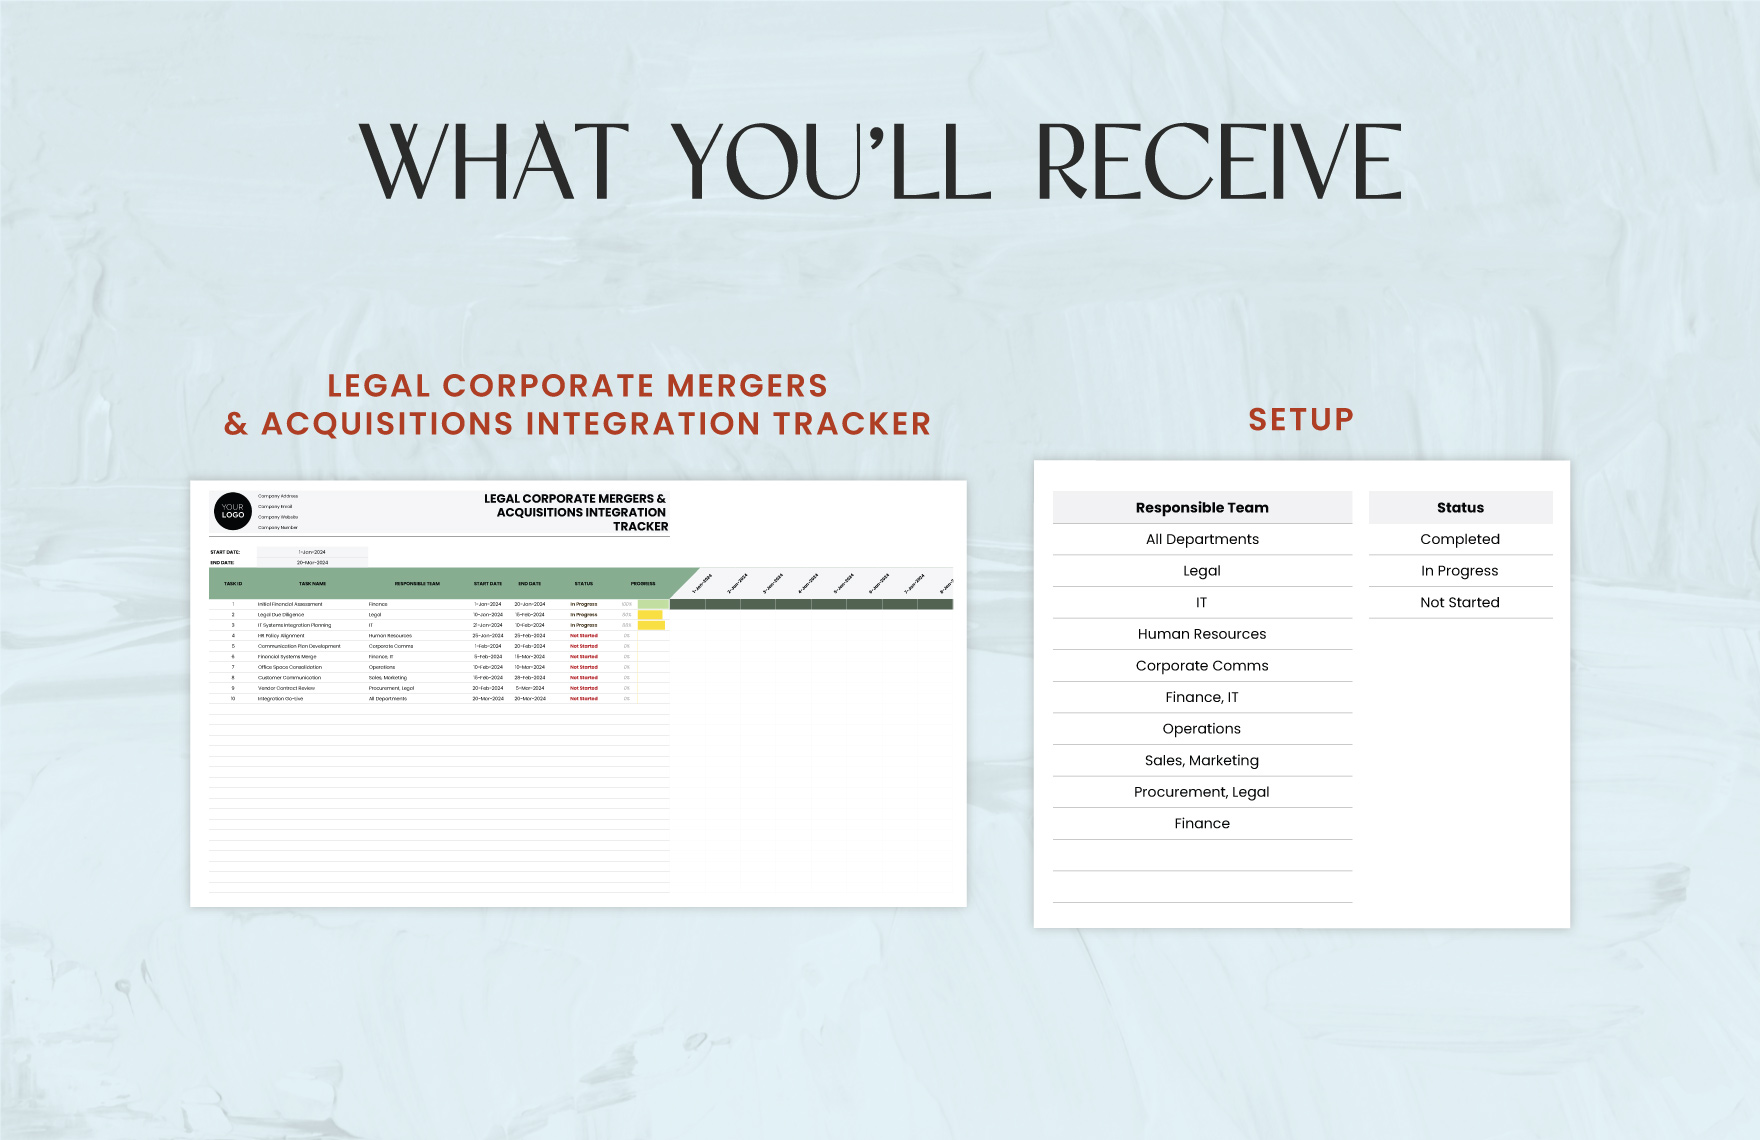 Legal Corporate Mergers & Acquisitions Integration Tracker Template